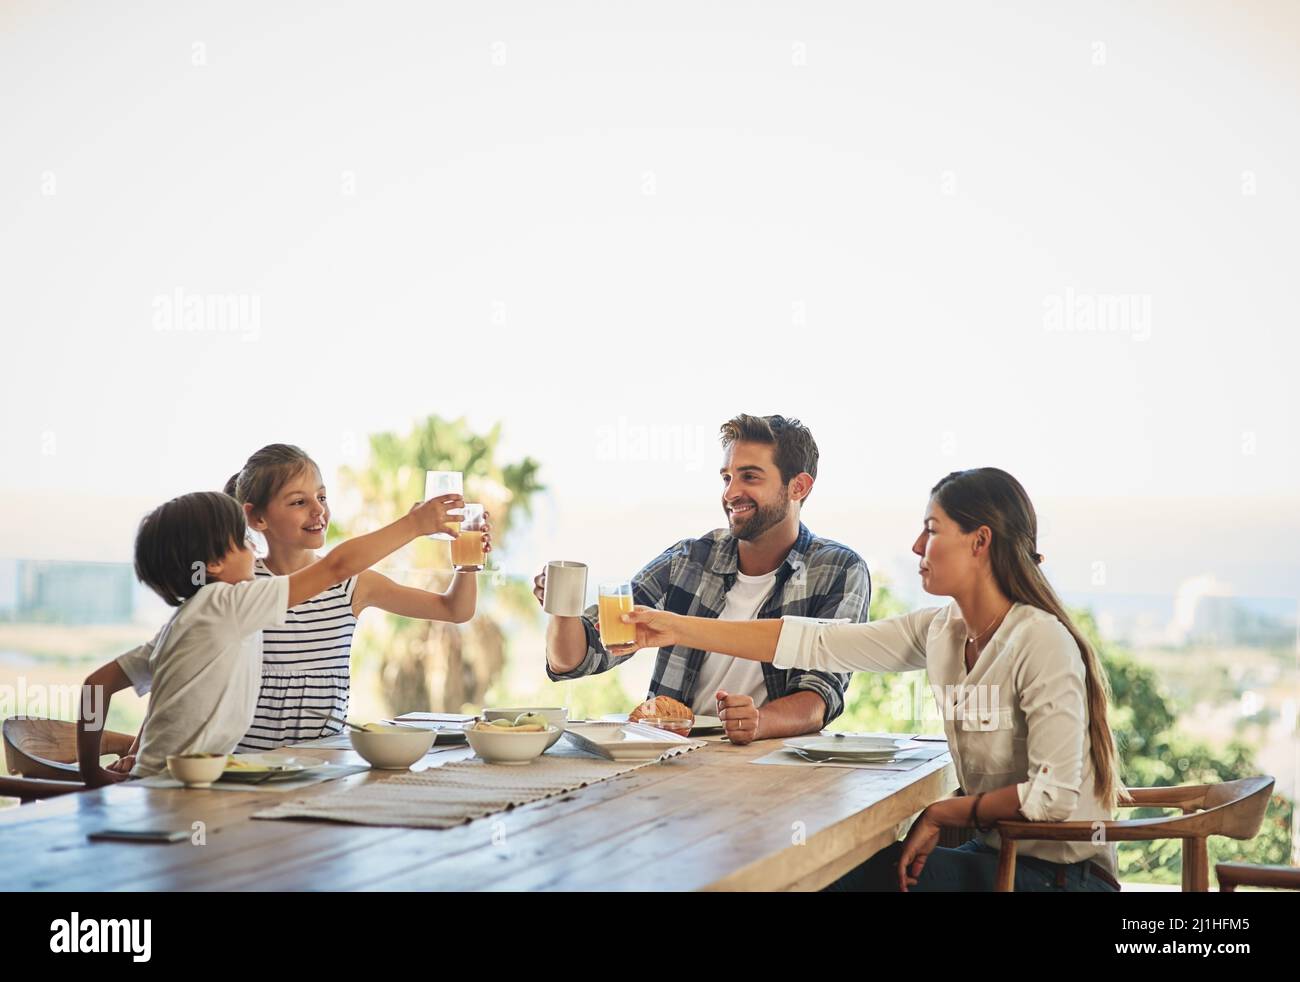 Having breakfast together is vital part of their family. Shot of a family having breakfast together at home. Stock Photo